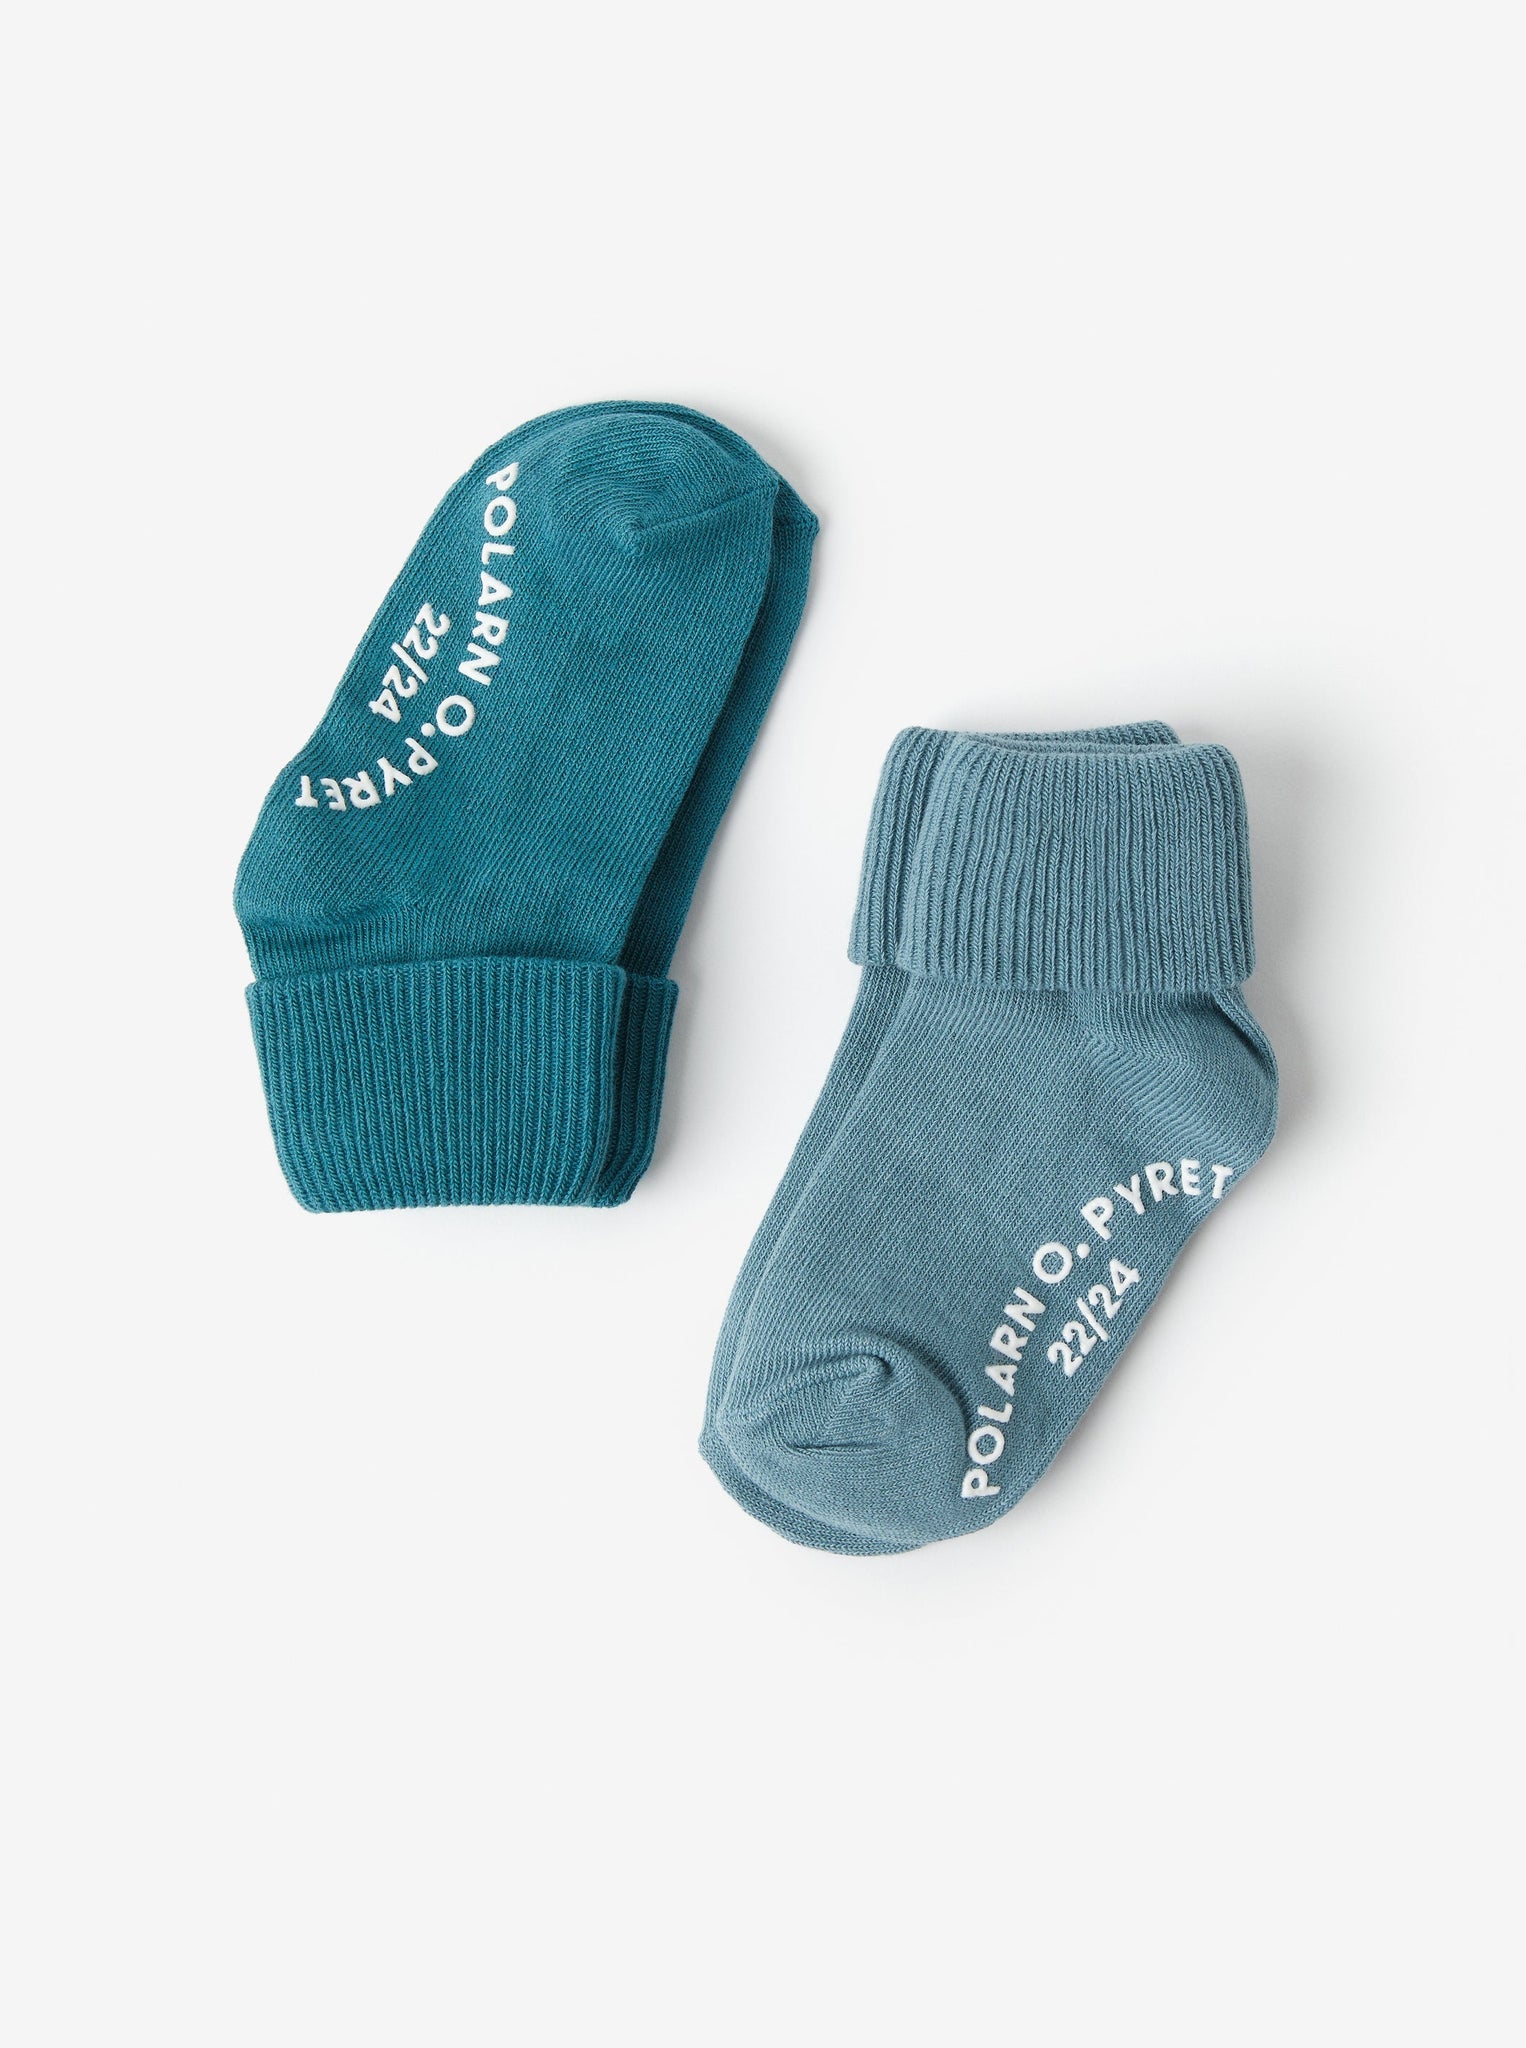 Blue Antislip Kids Socks Multipack from the Polarn O. Pyret kidswear collection. Clothes made using sustainably sourced materials.